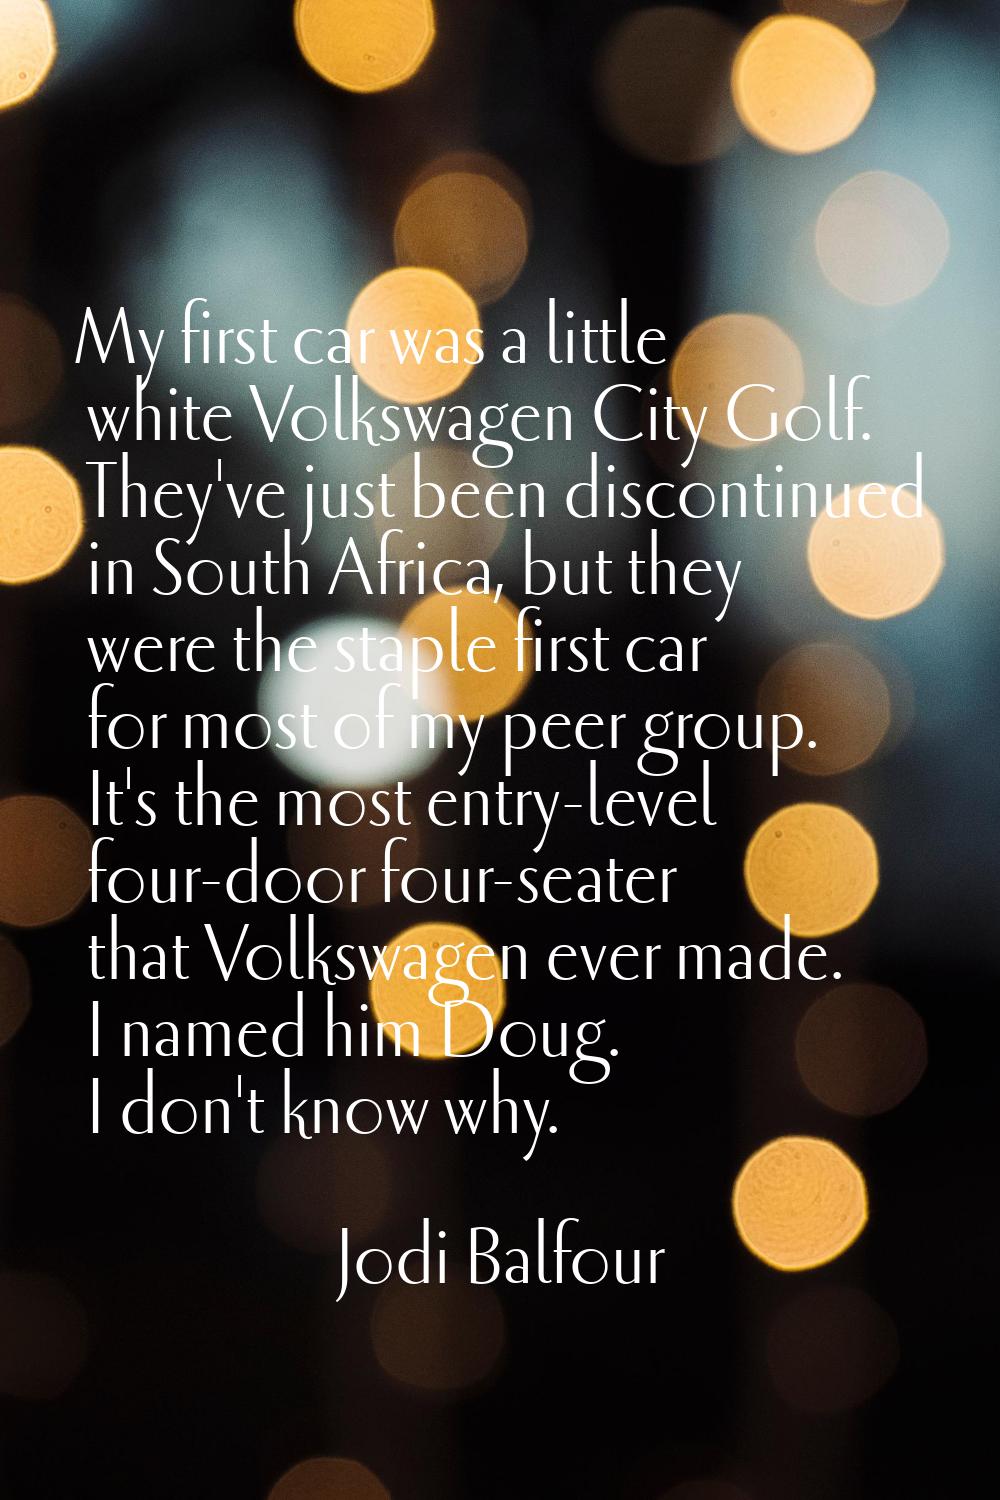 My first car was a little white Volkswagen City Golf. They've just been discontinued in South Afric